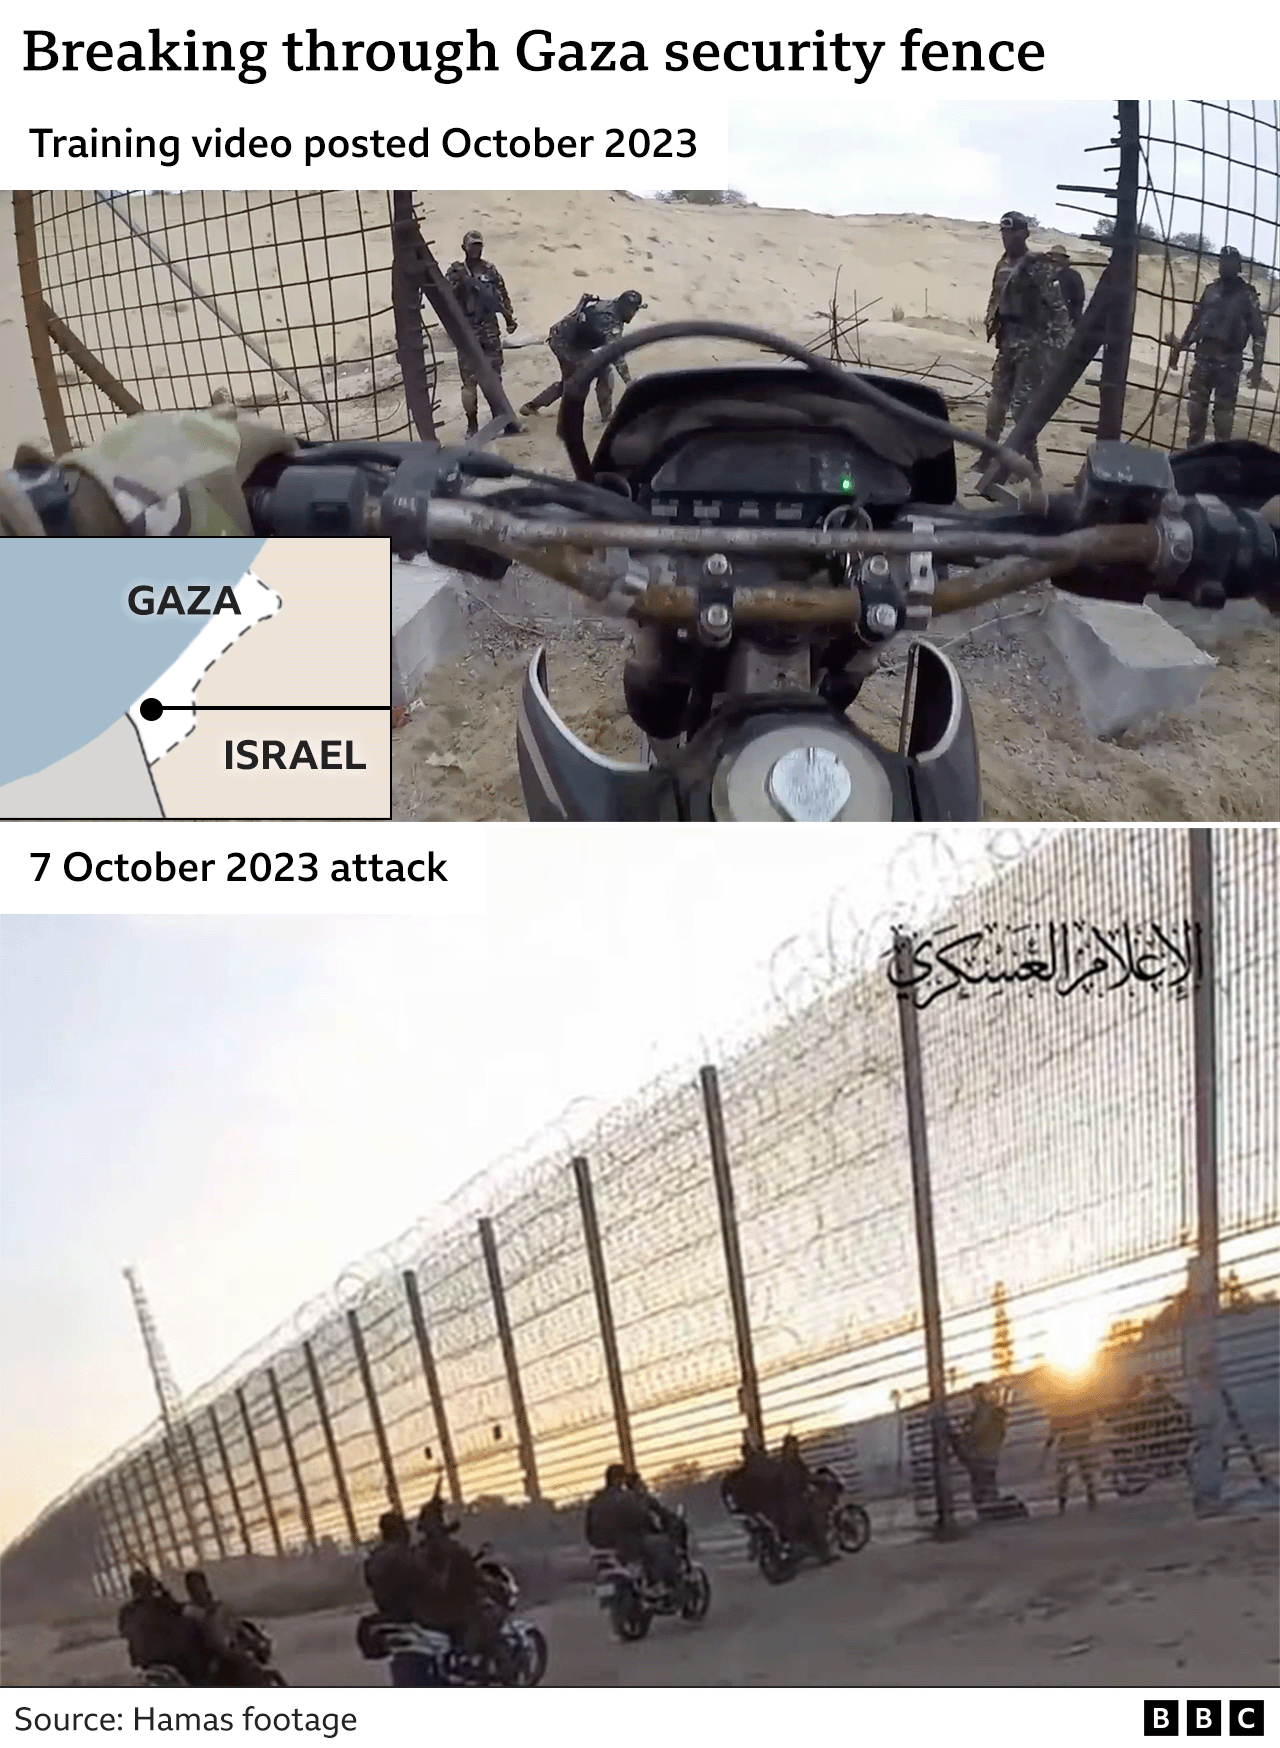 Images of Hamas using motorcycles